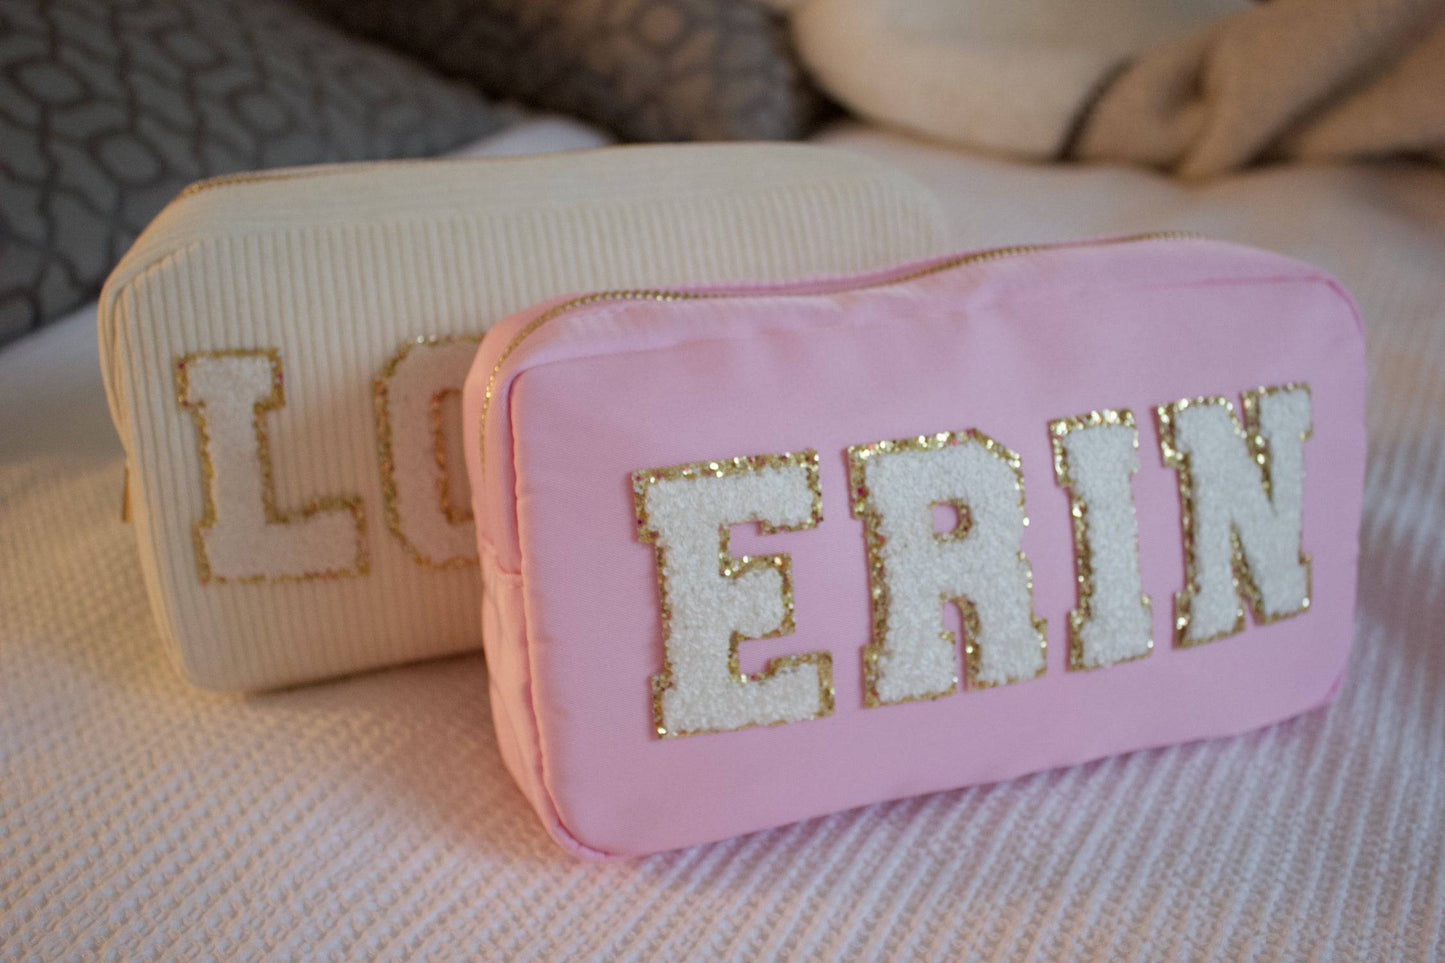 Personalised Make-Up Cosmetics Bags